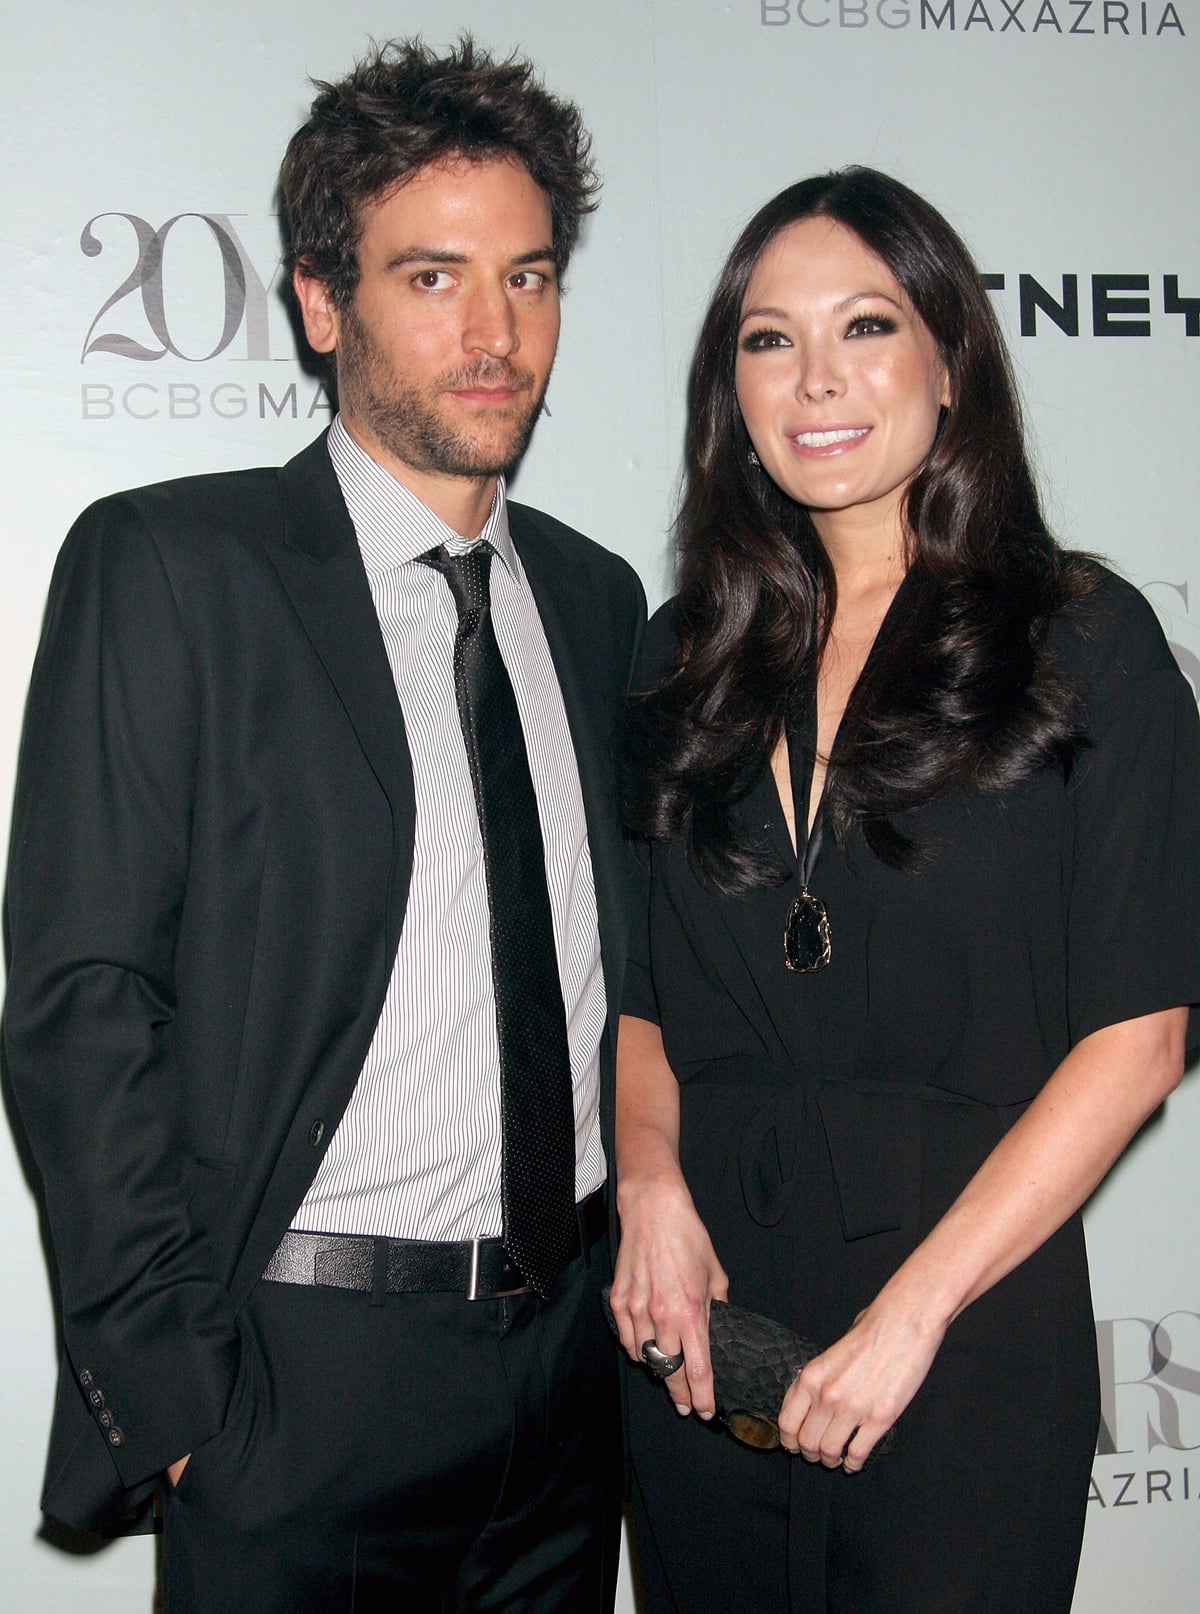 Shawn Piller and Lindsay Price married in 2004 and divorced in 2007